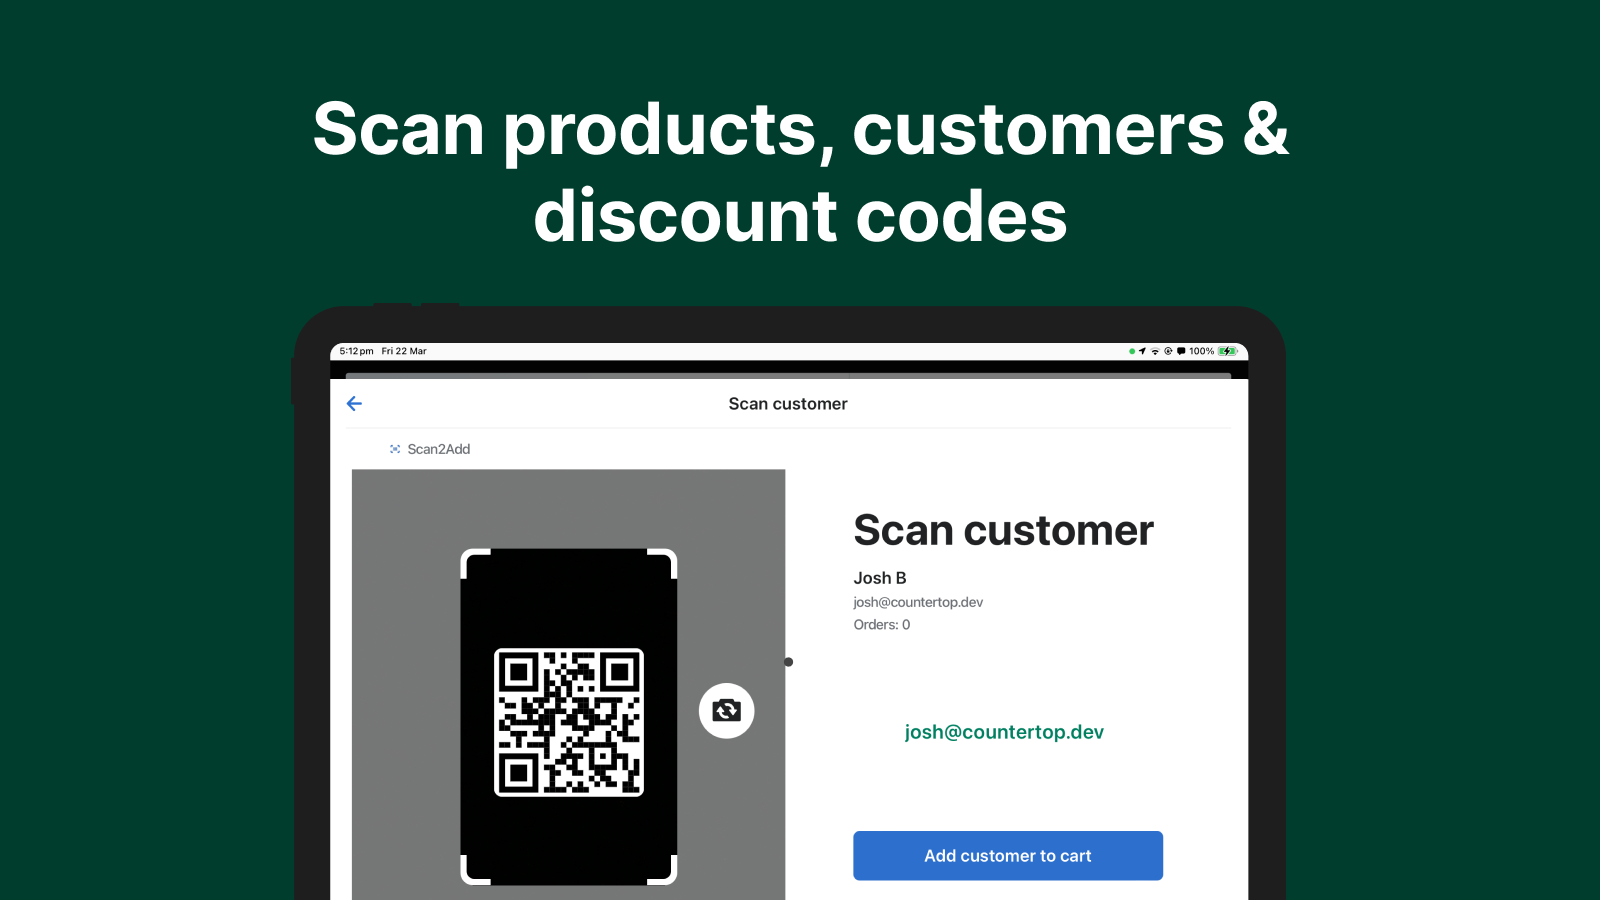 Scanning a QR code containing a customer ID